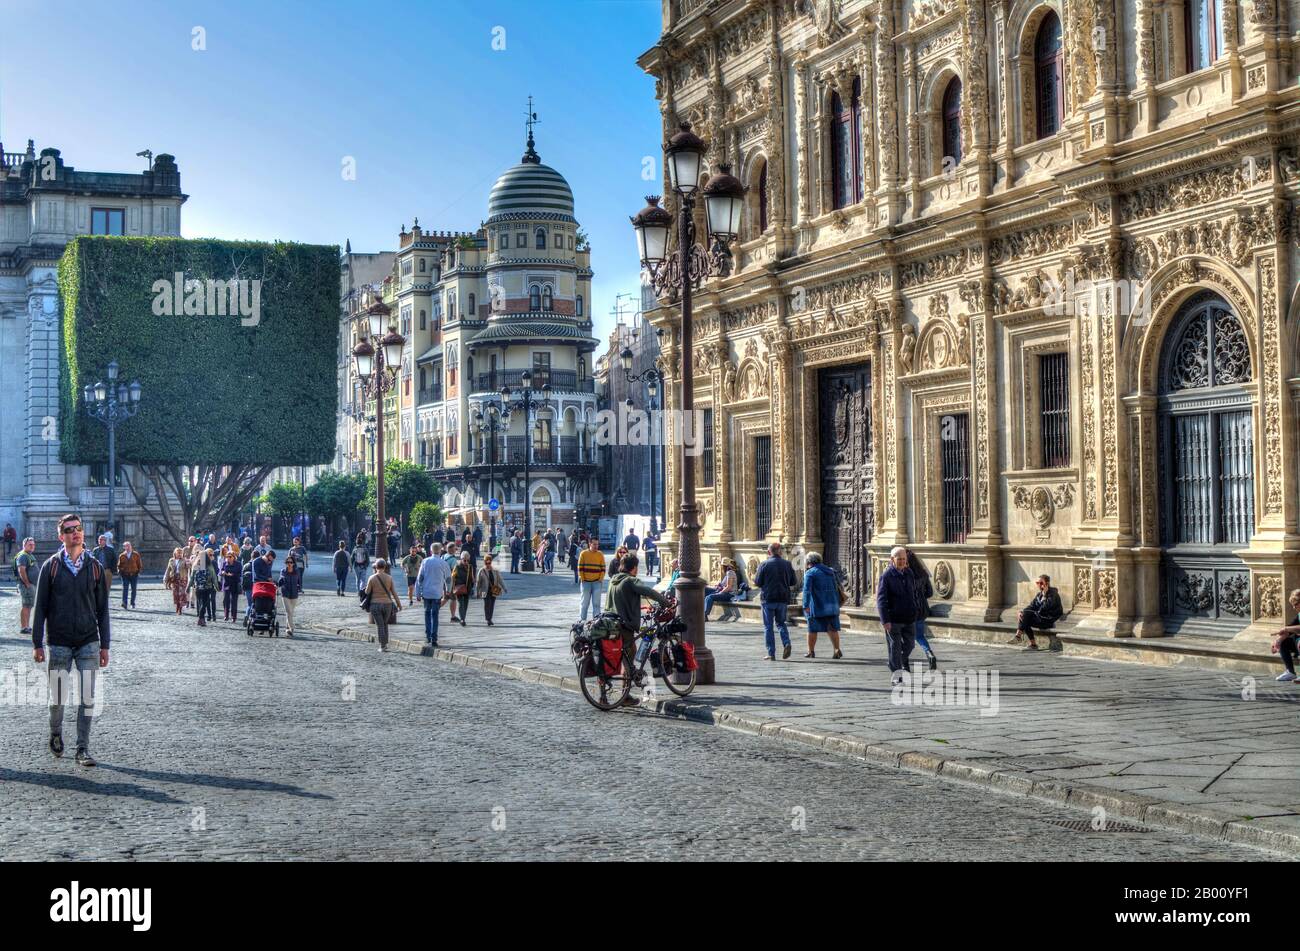 Plaza San Francisco (San Francis Square). Town hall on the right, Adriatic building in the center, Bank of Spain Stock Photo